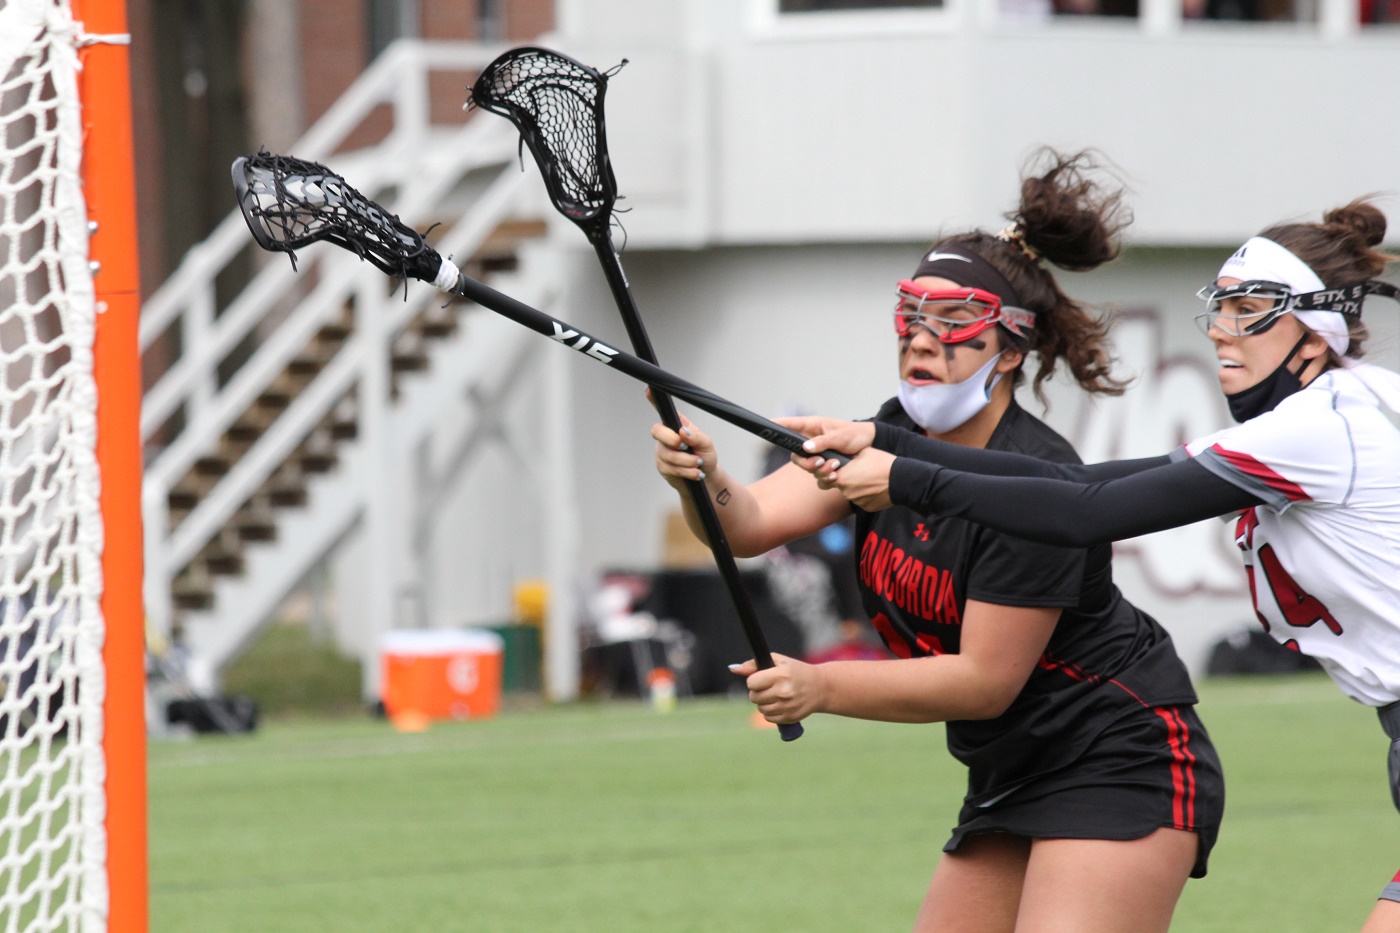 Nicole Bordo scored a career high 4 goals for the Cardinals. Photo courtesy of Michael Costello